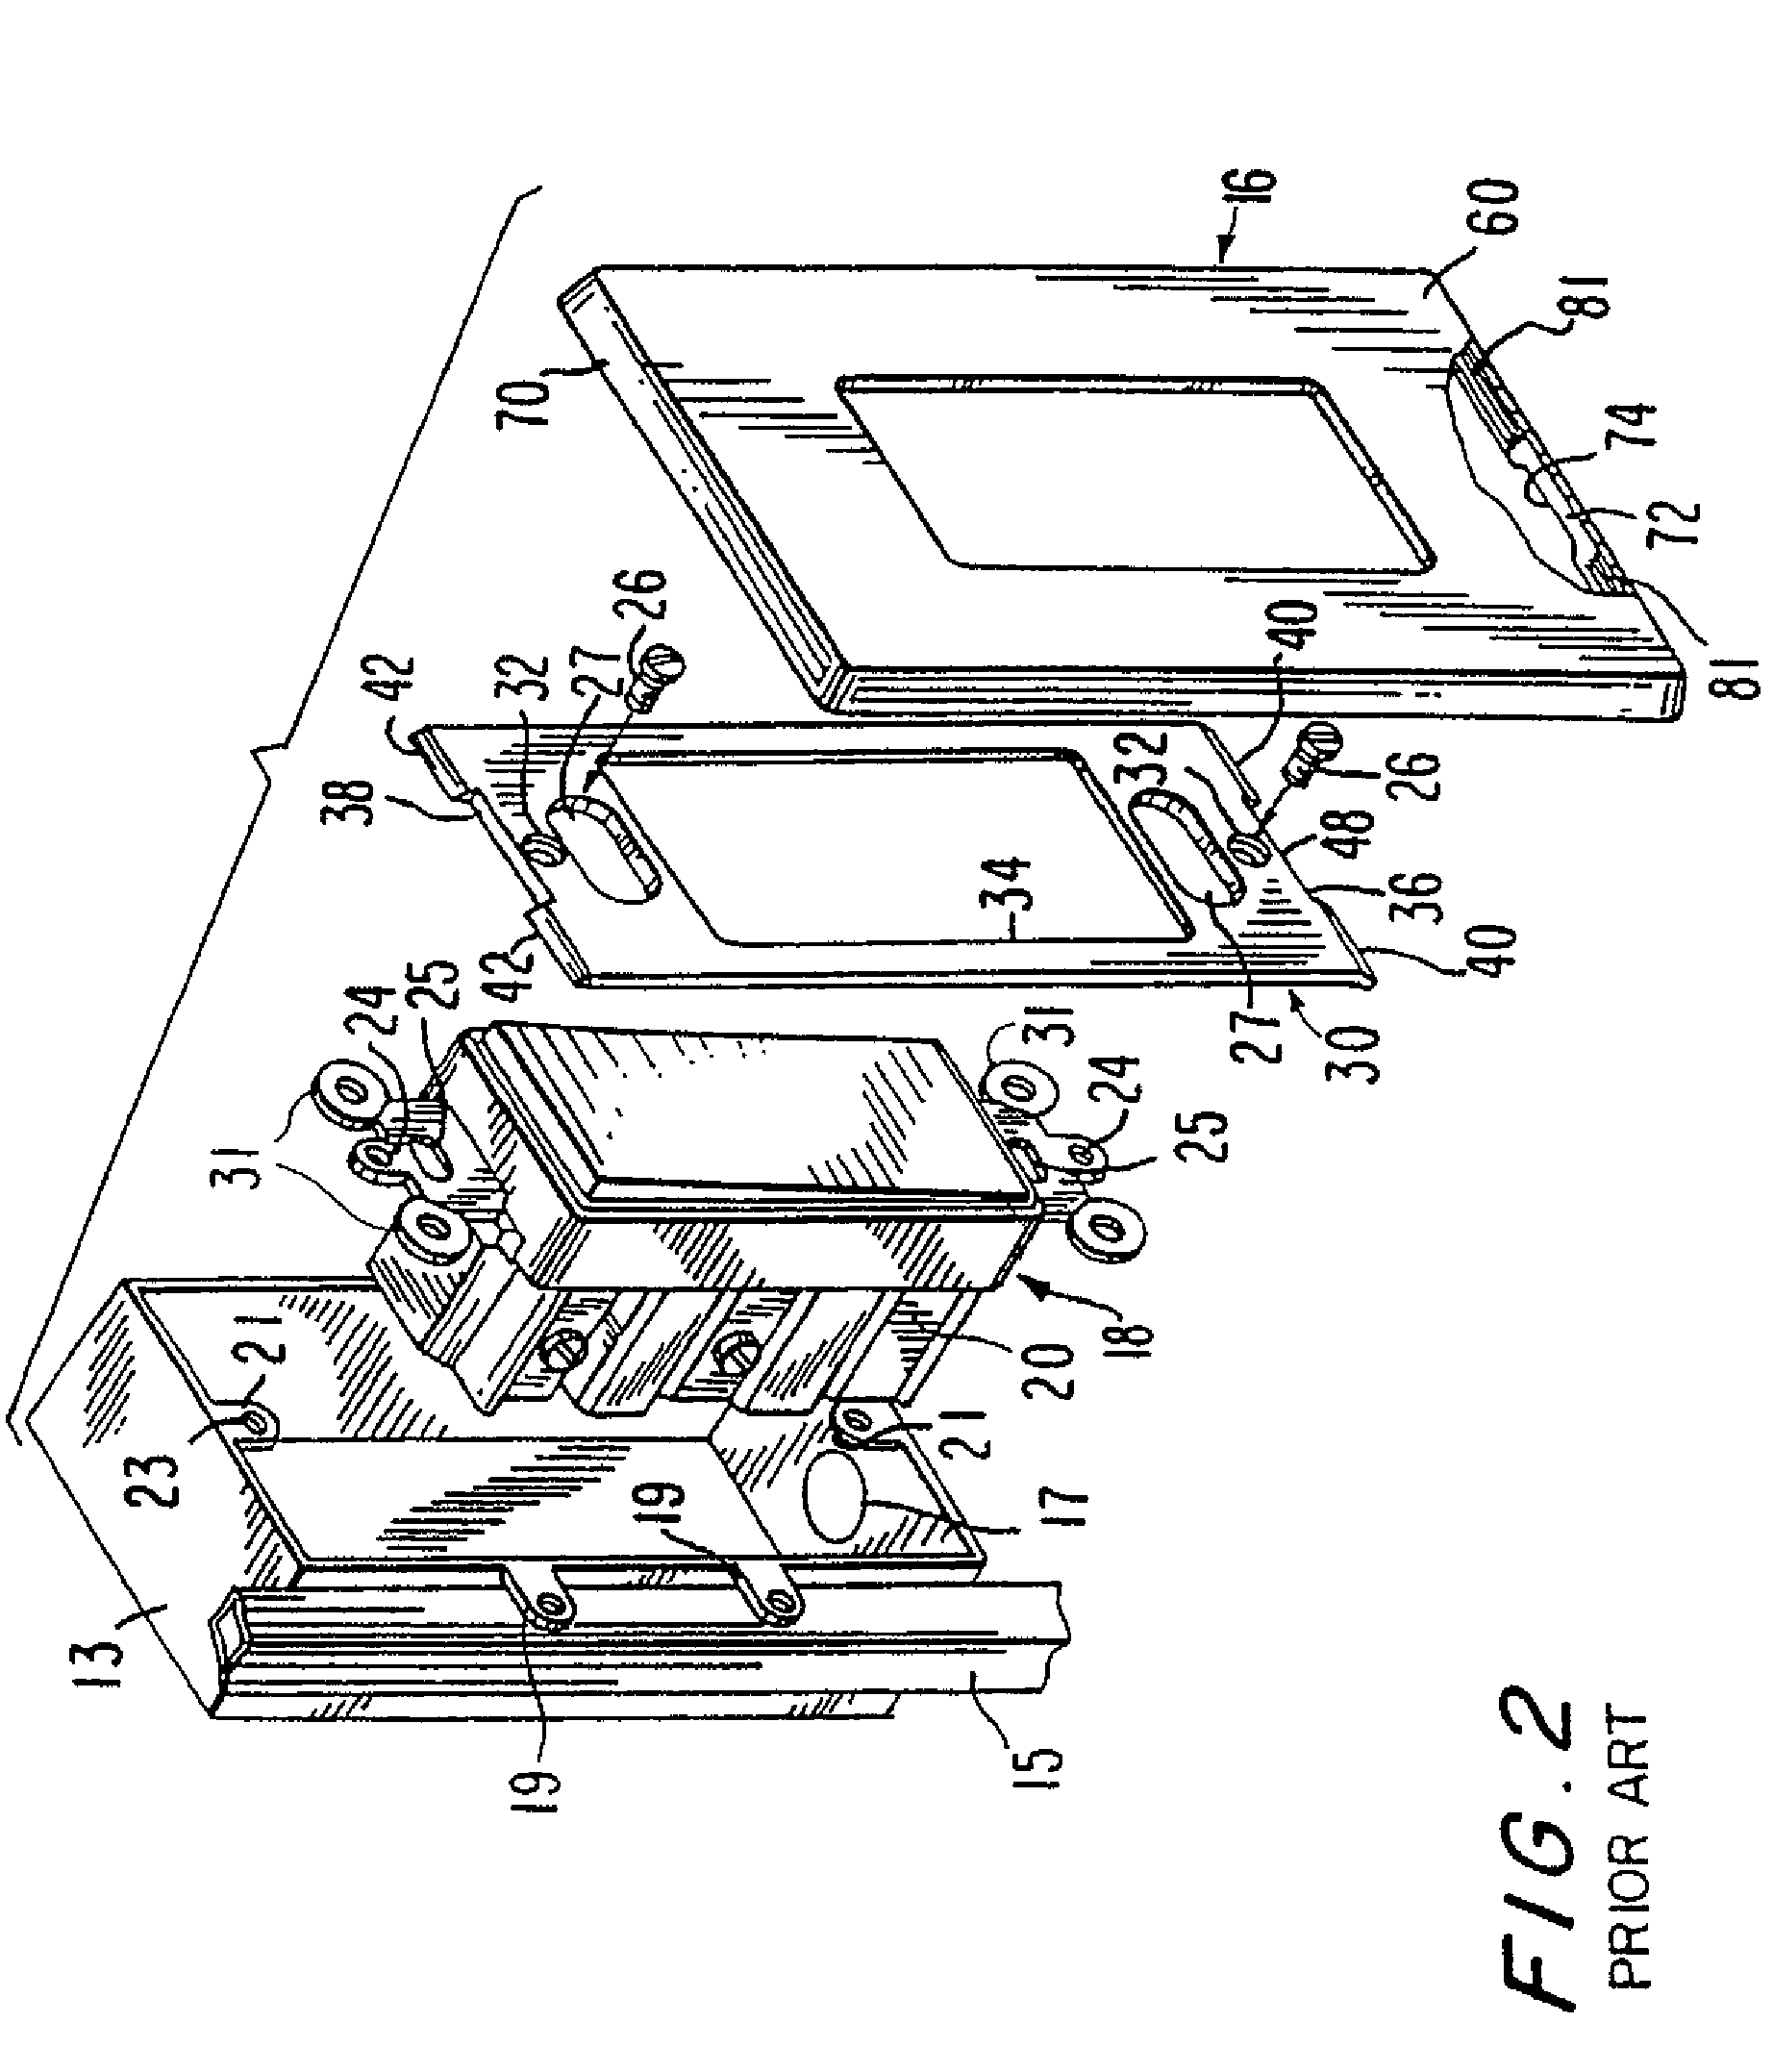 Shaped wall plate for wiring device